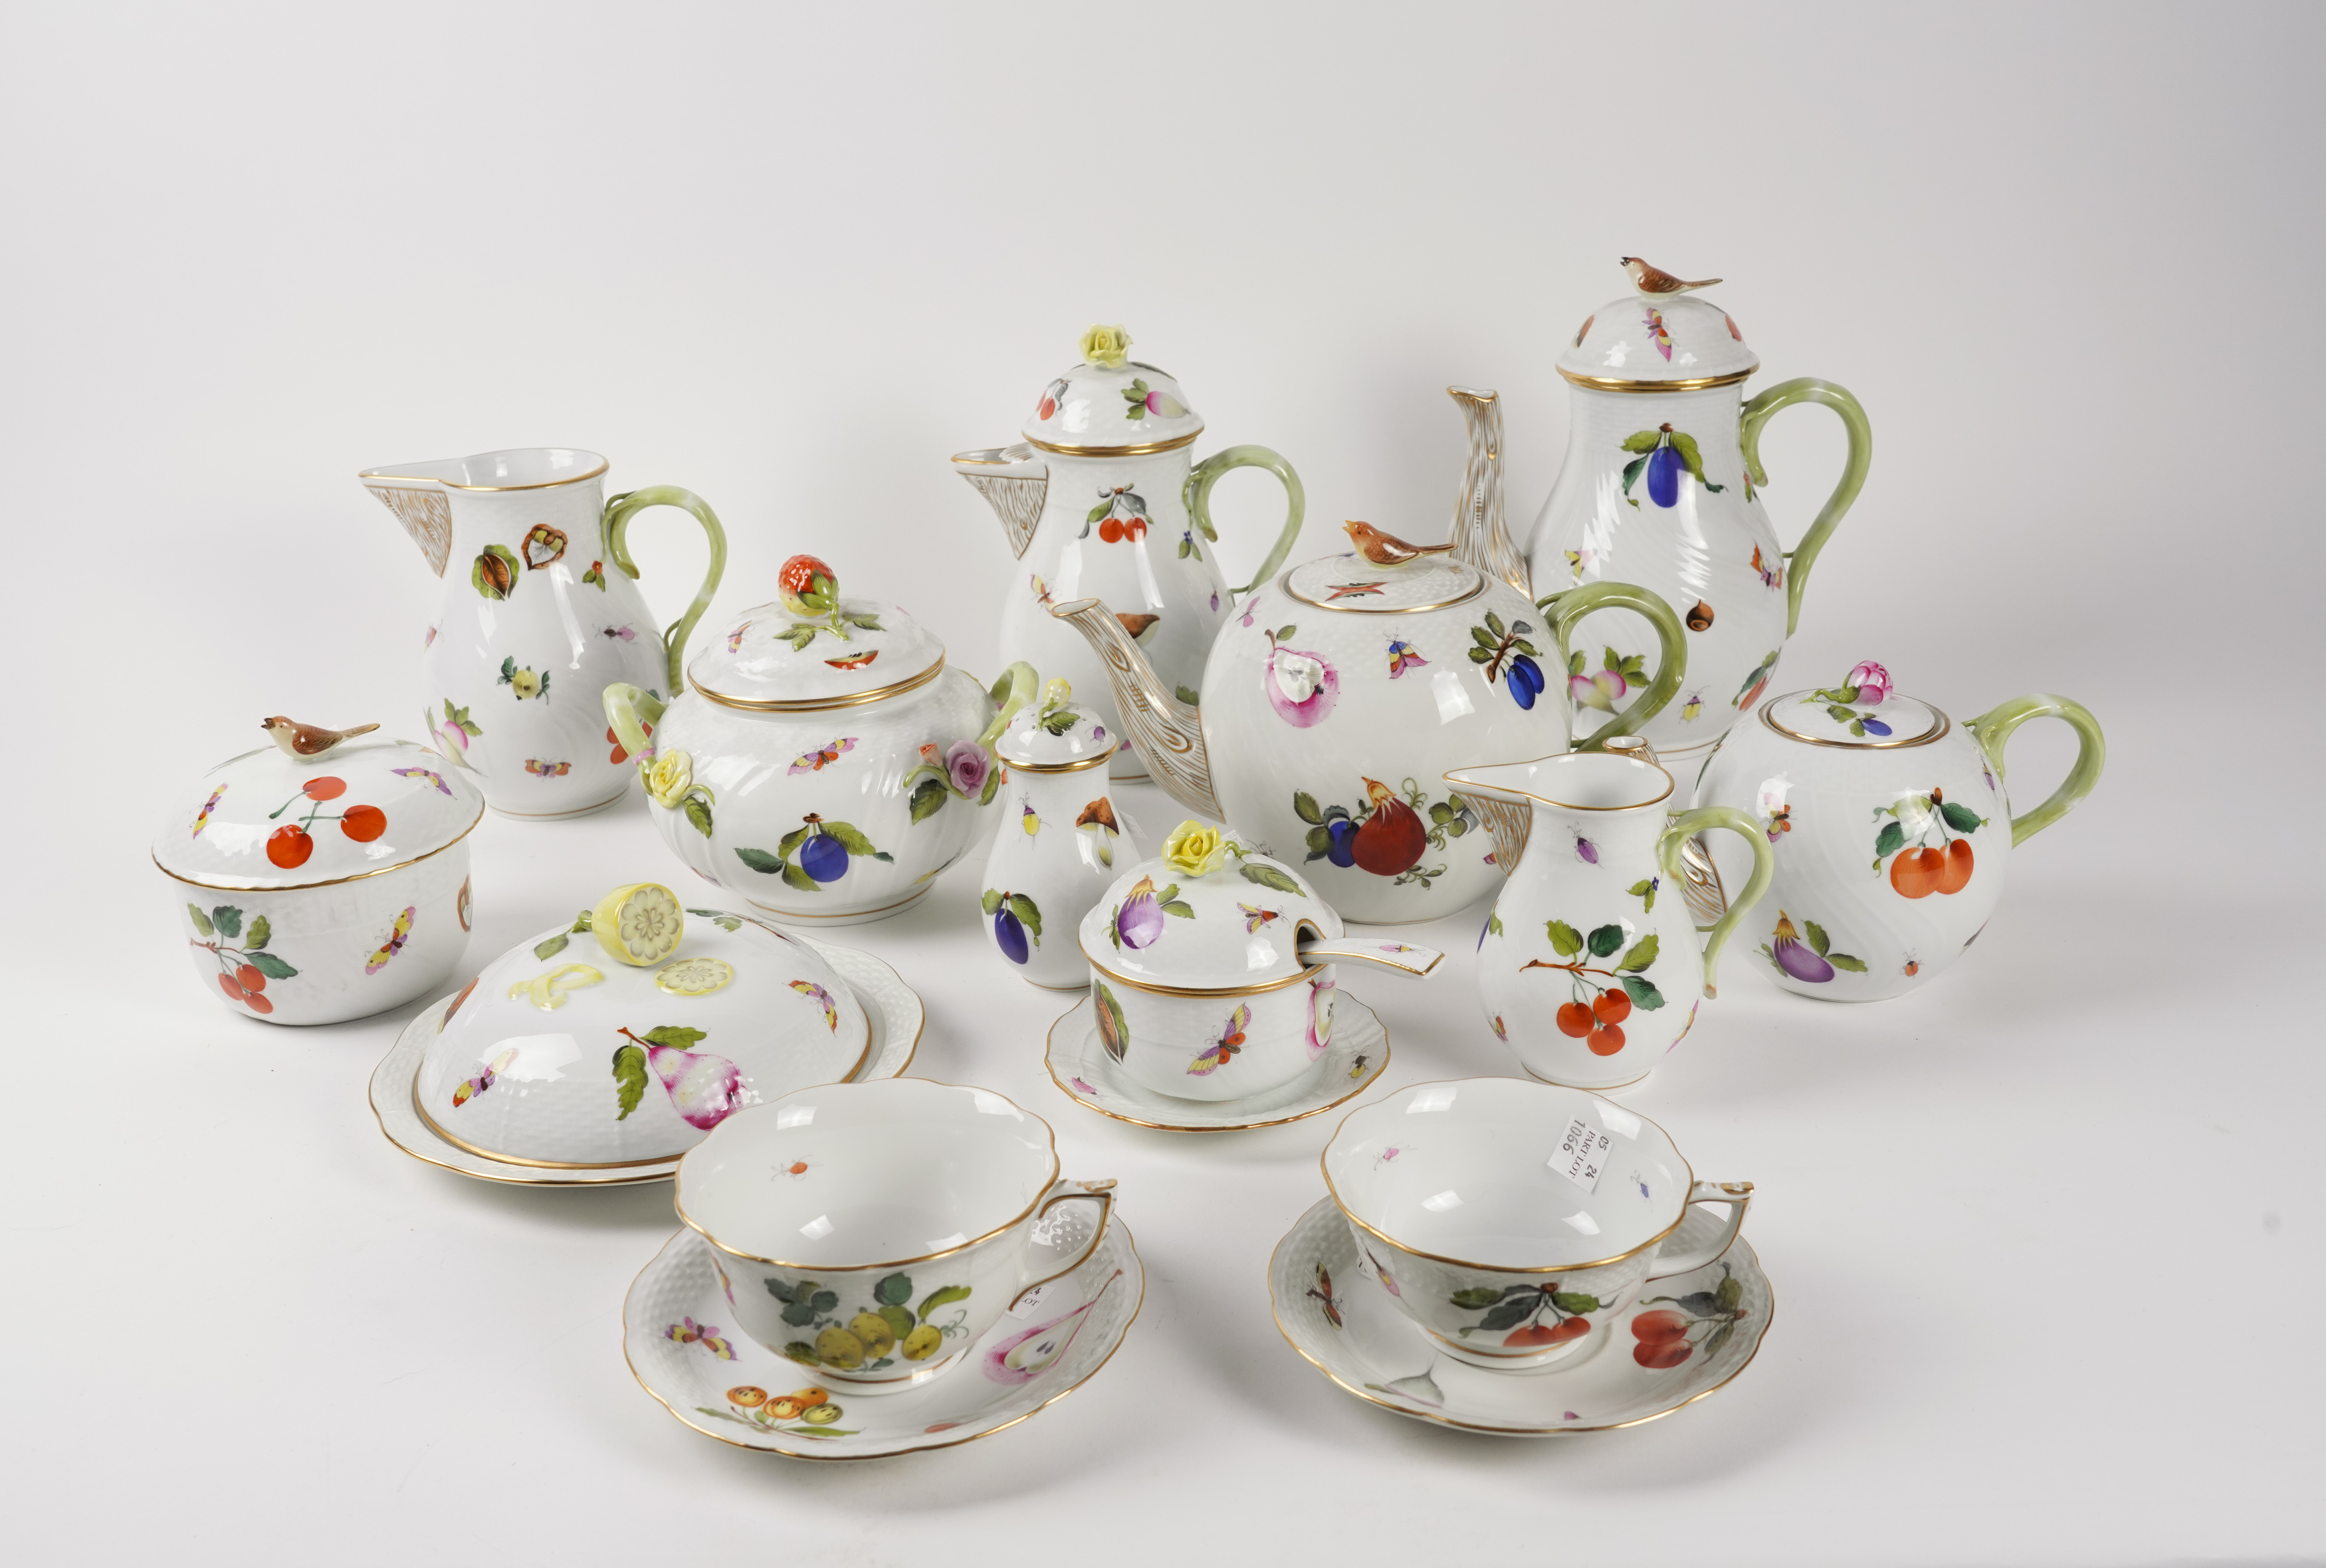 AN ASSEMBLED GROUP OF HEREND `MARKET GARDEN' PATTERN TEA, COFFEE AND BREAKFAST WARES - Image 3 of 5